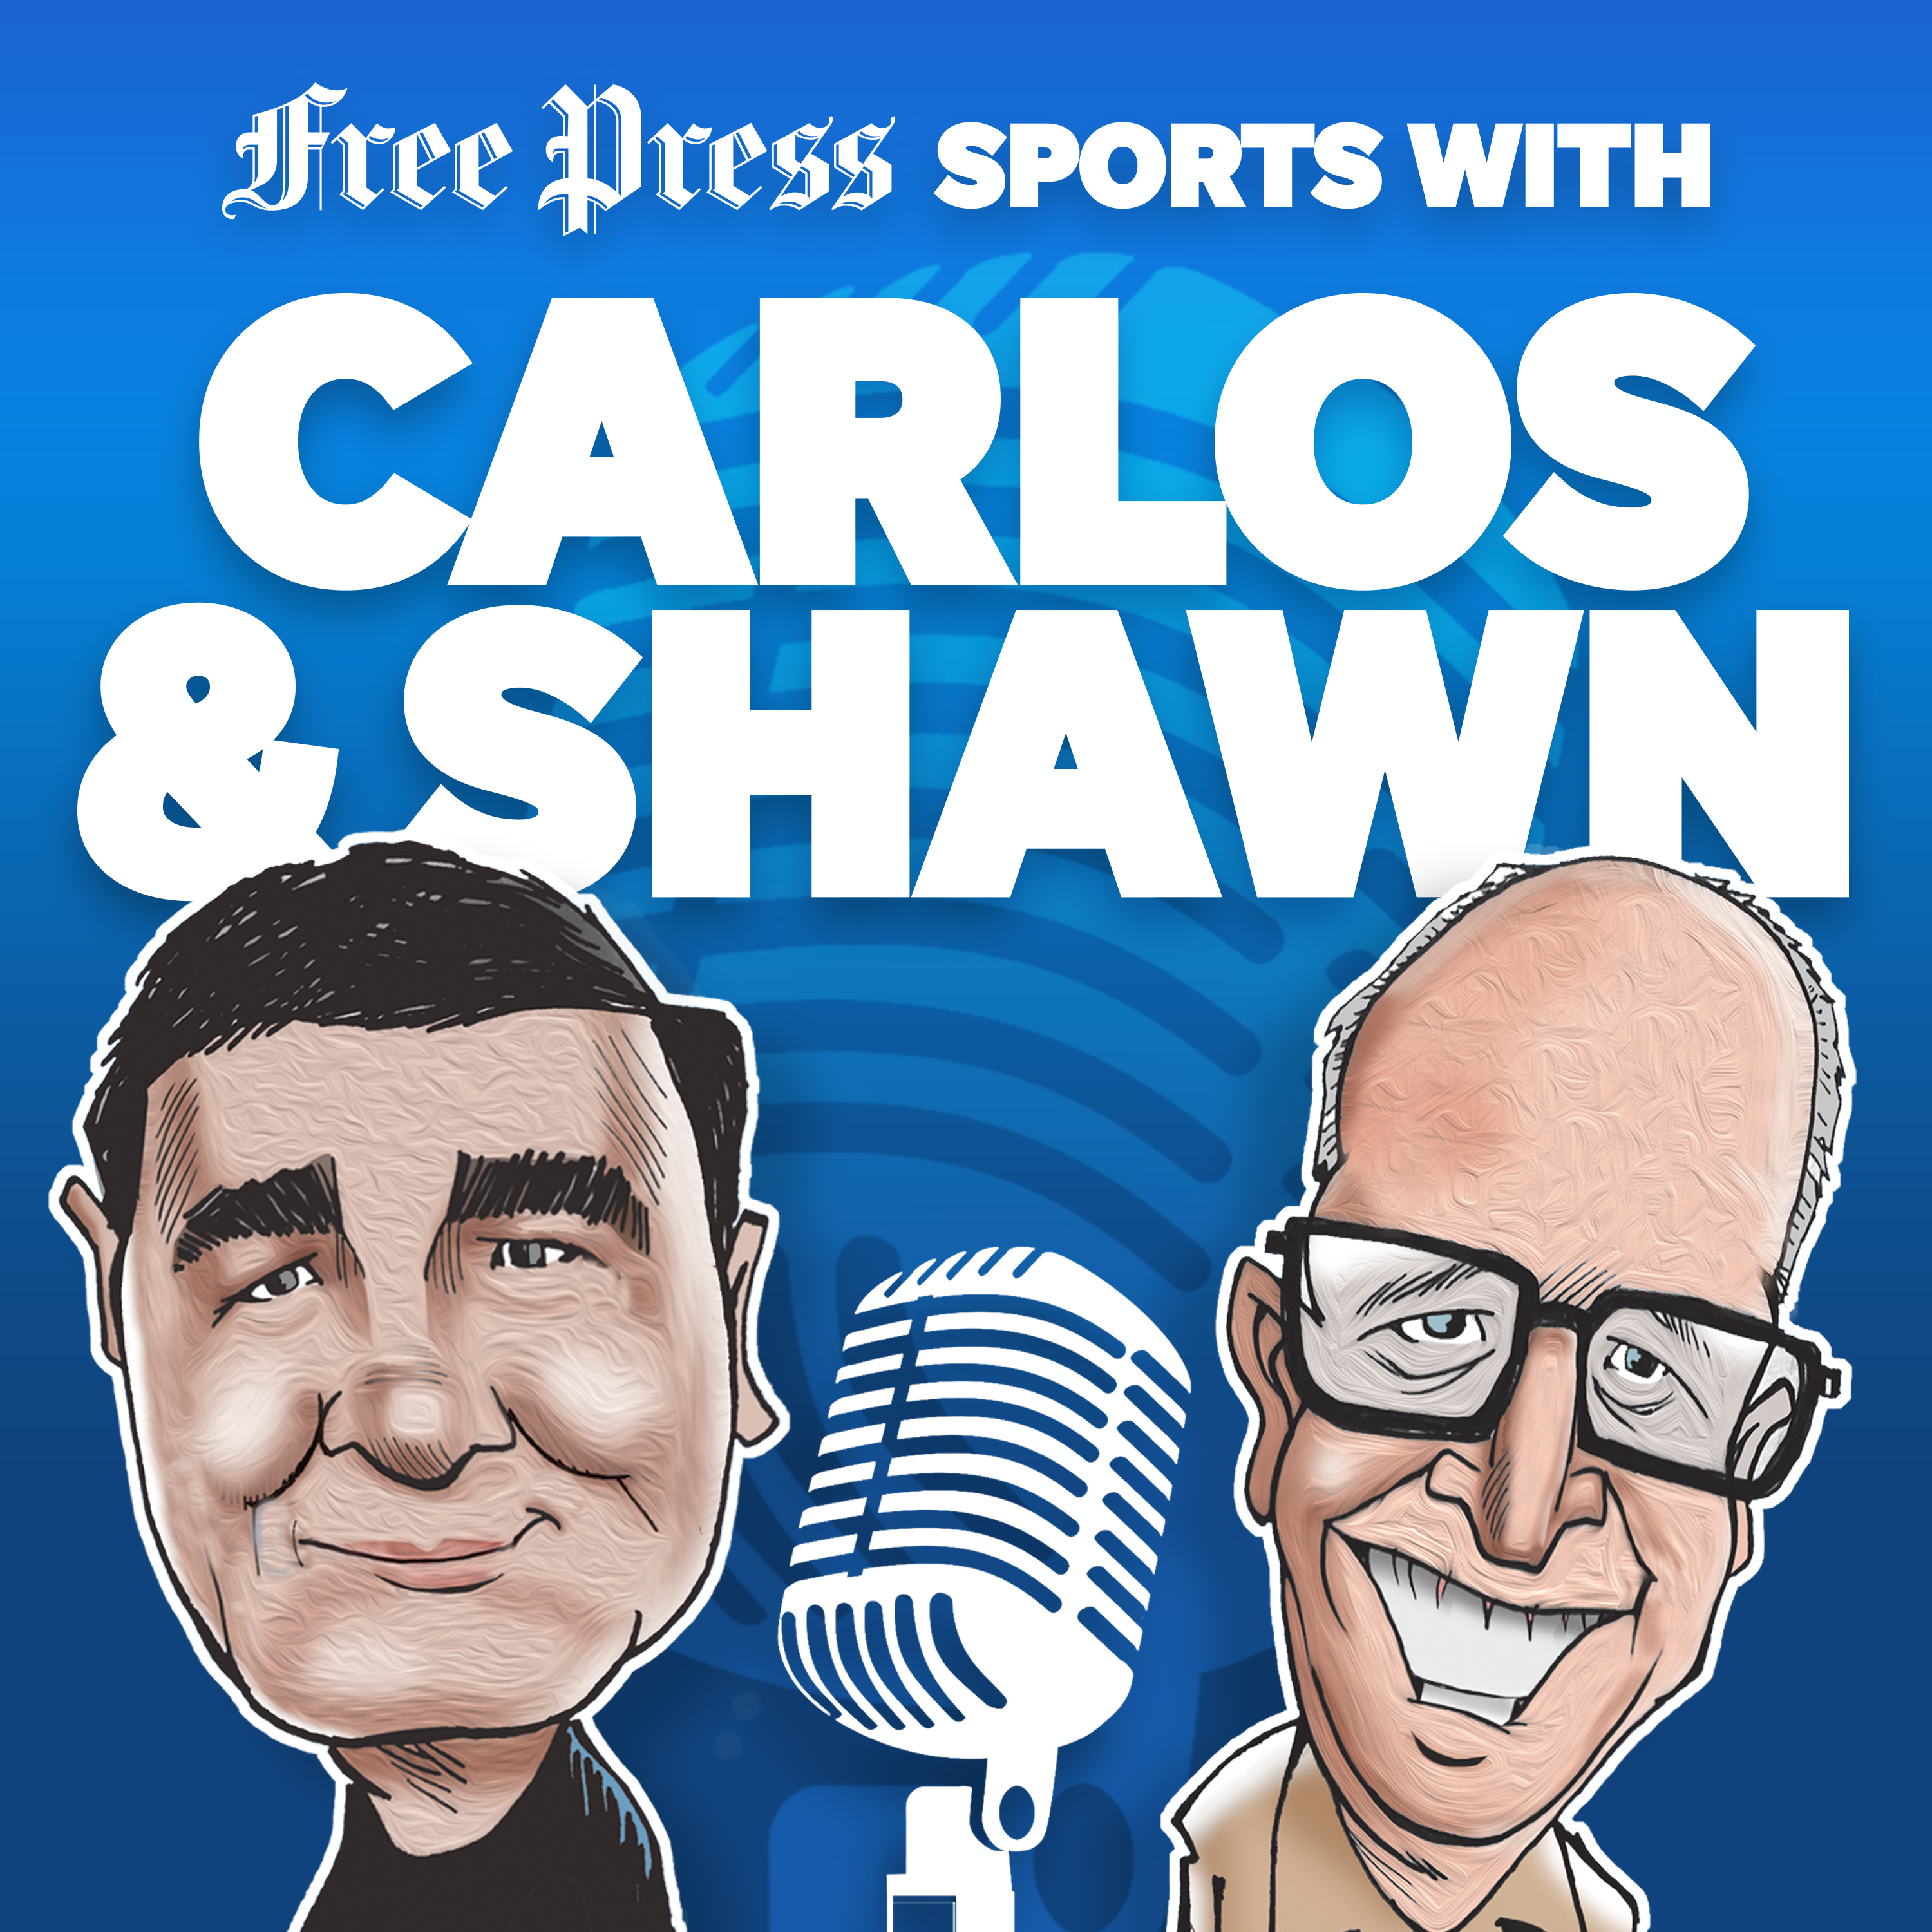 Detroit Lions beat writer Dave Birkett joins Carlos and Shawn to break down what the Lions may do in the 2022 NFL draft.